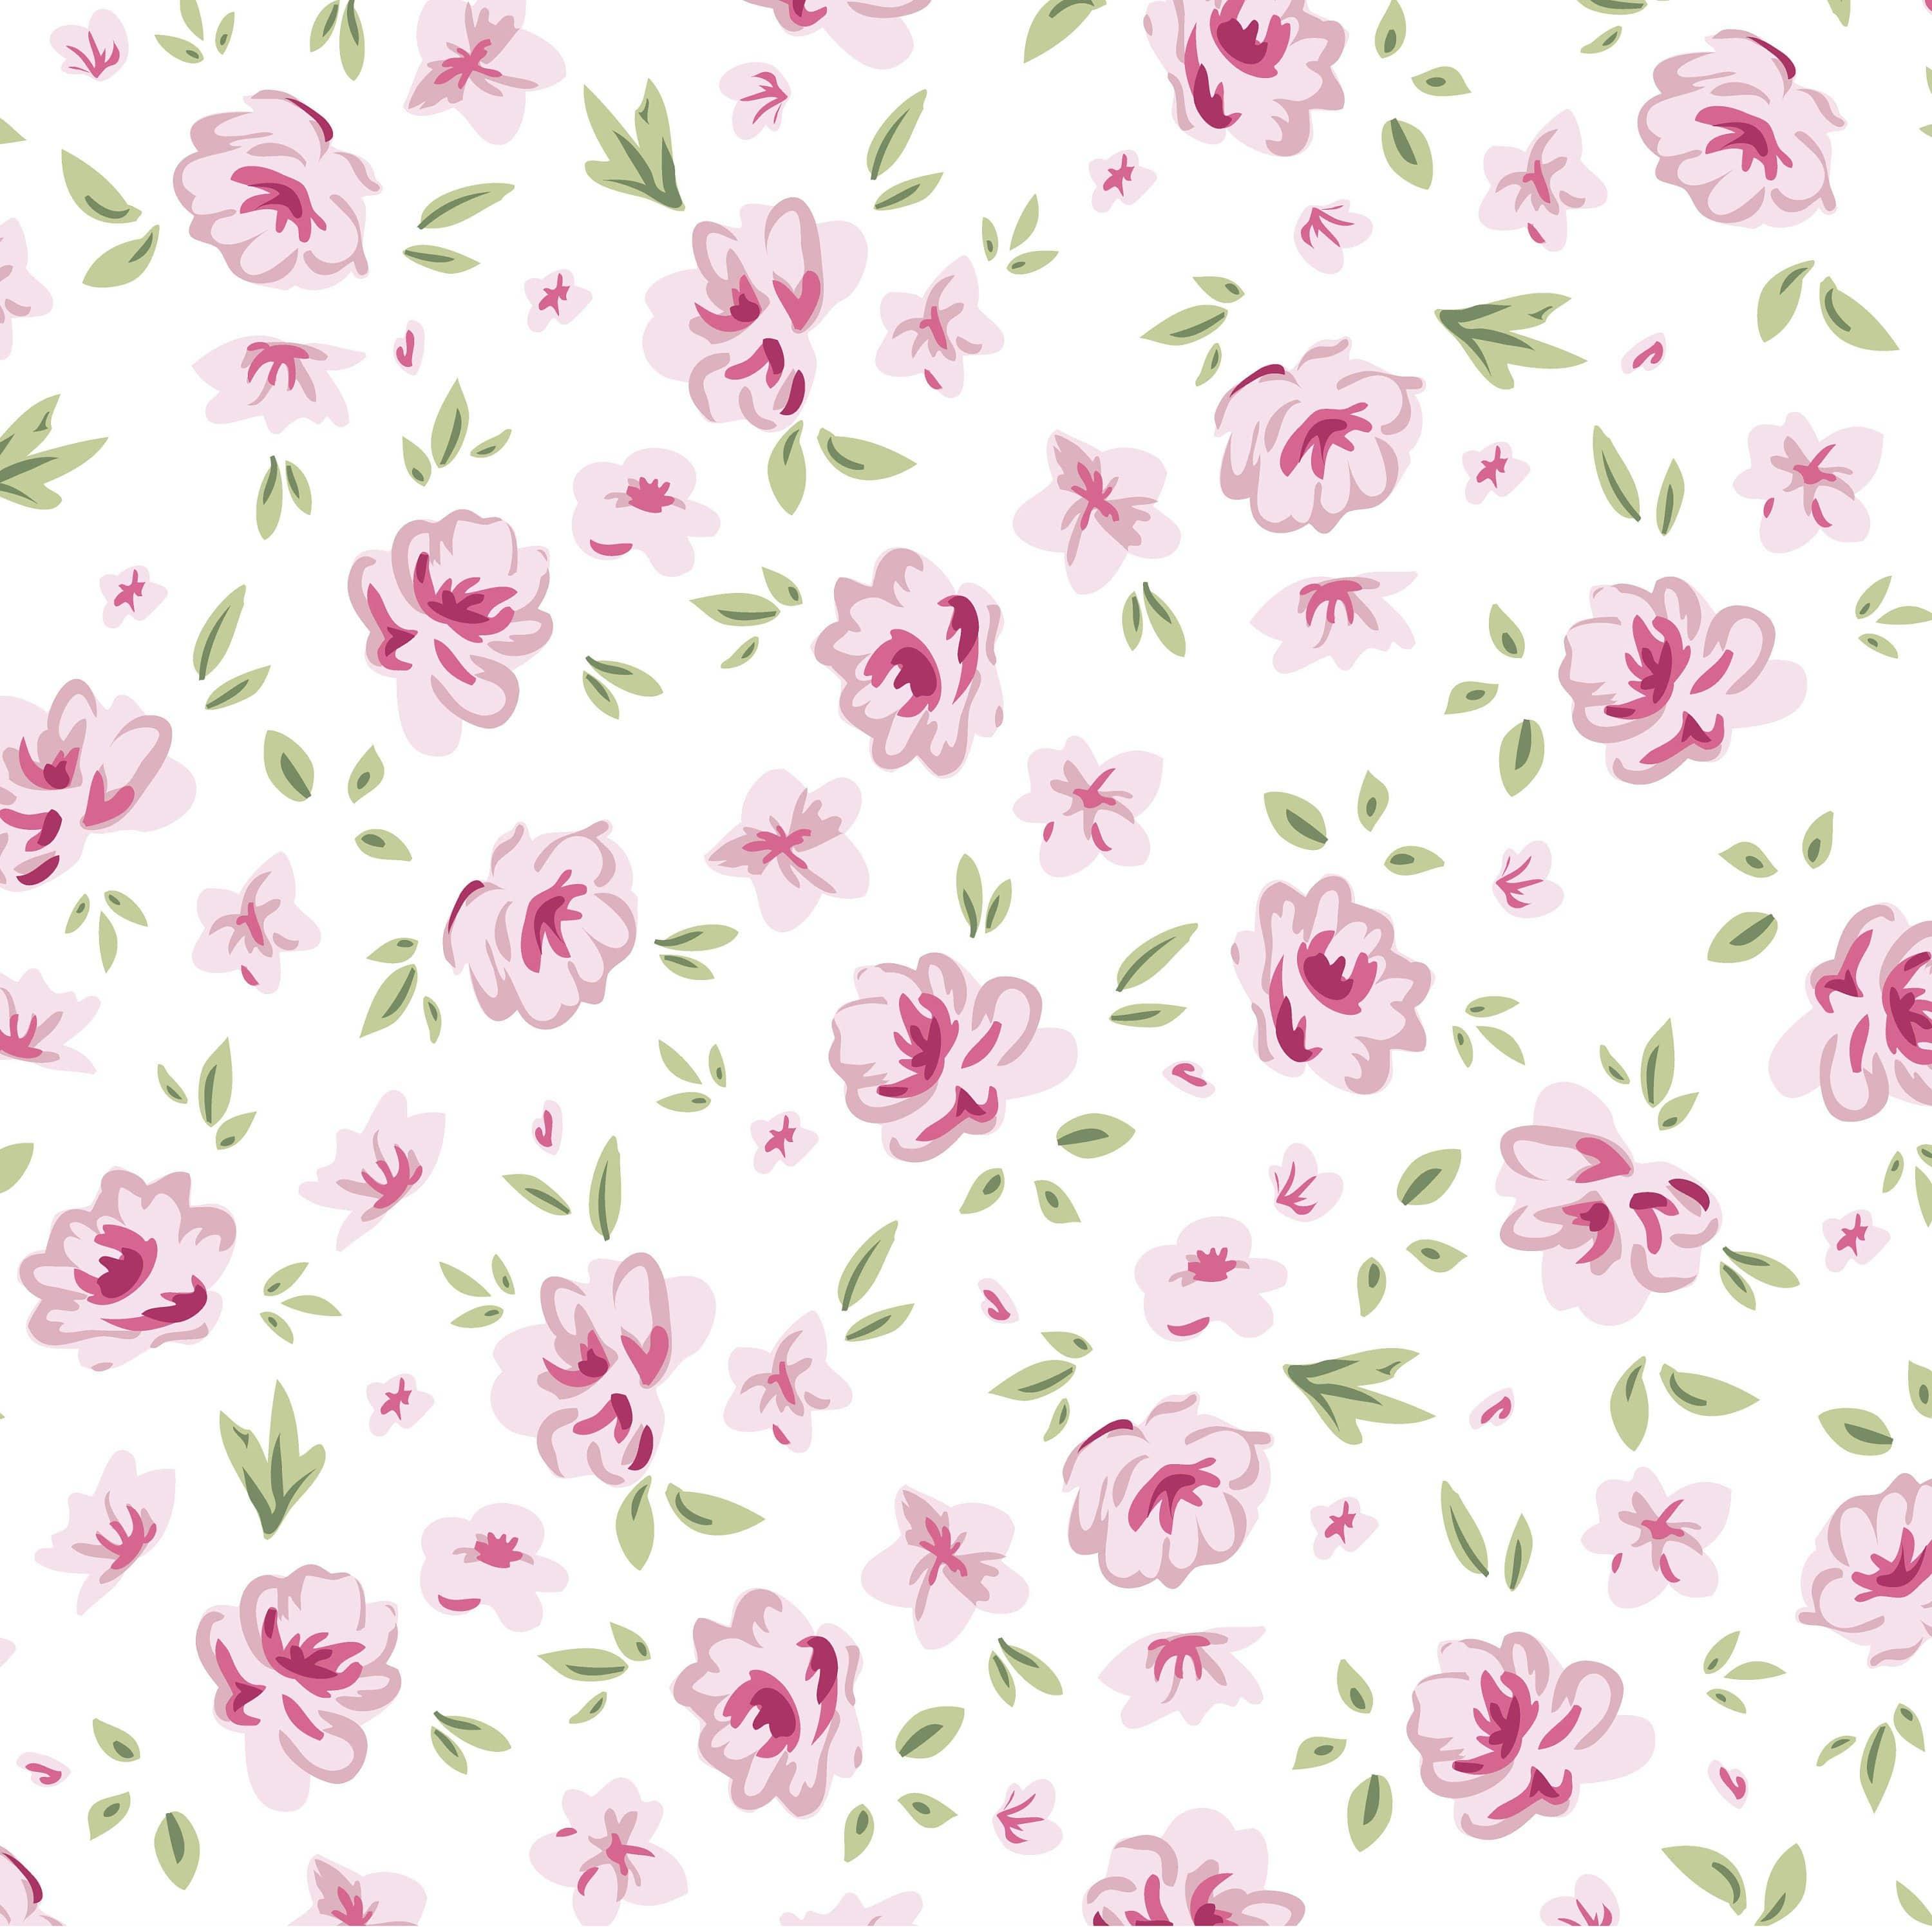 Shabby chic rose pattern floral seamless background 28" Wallpaper